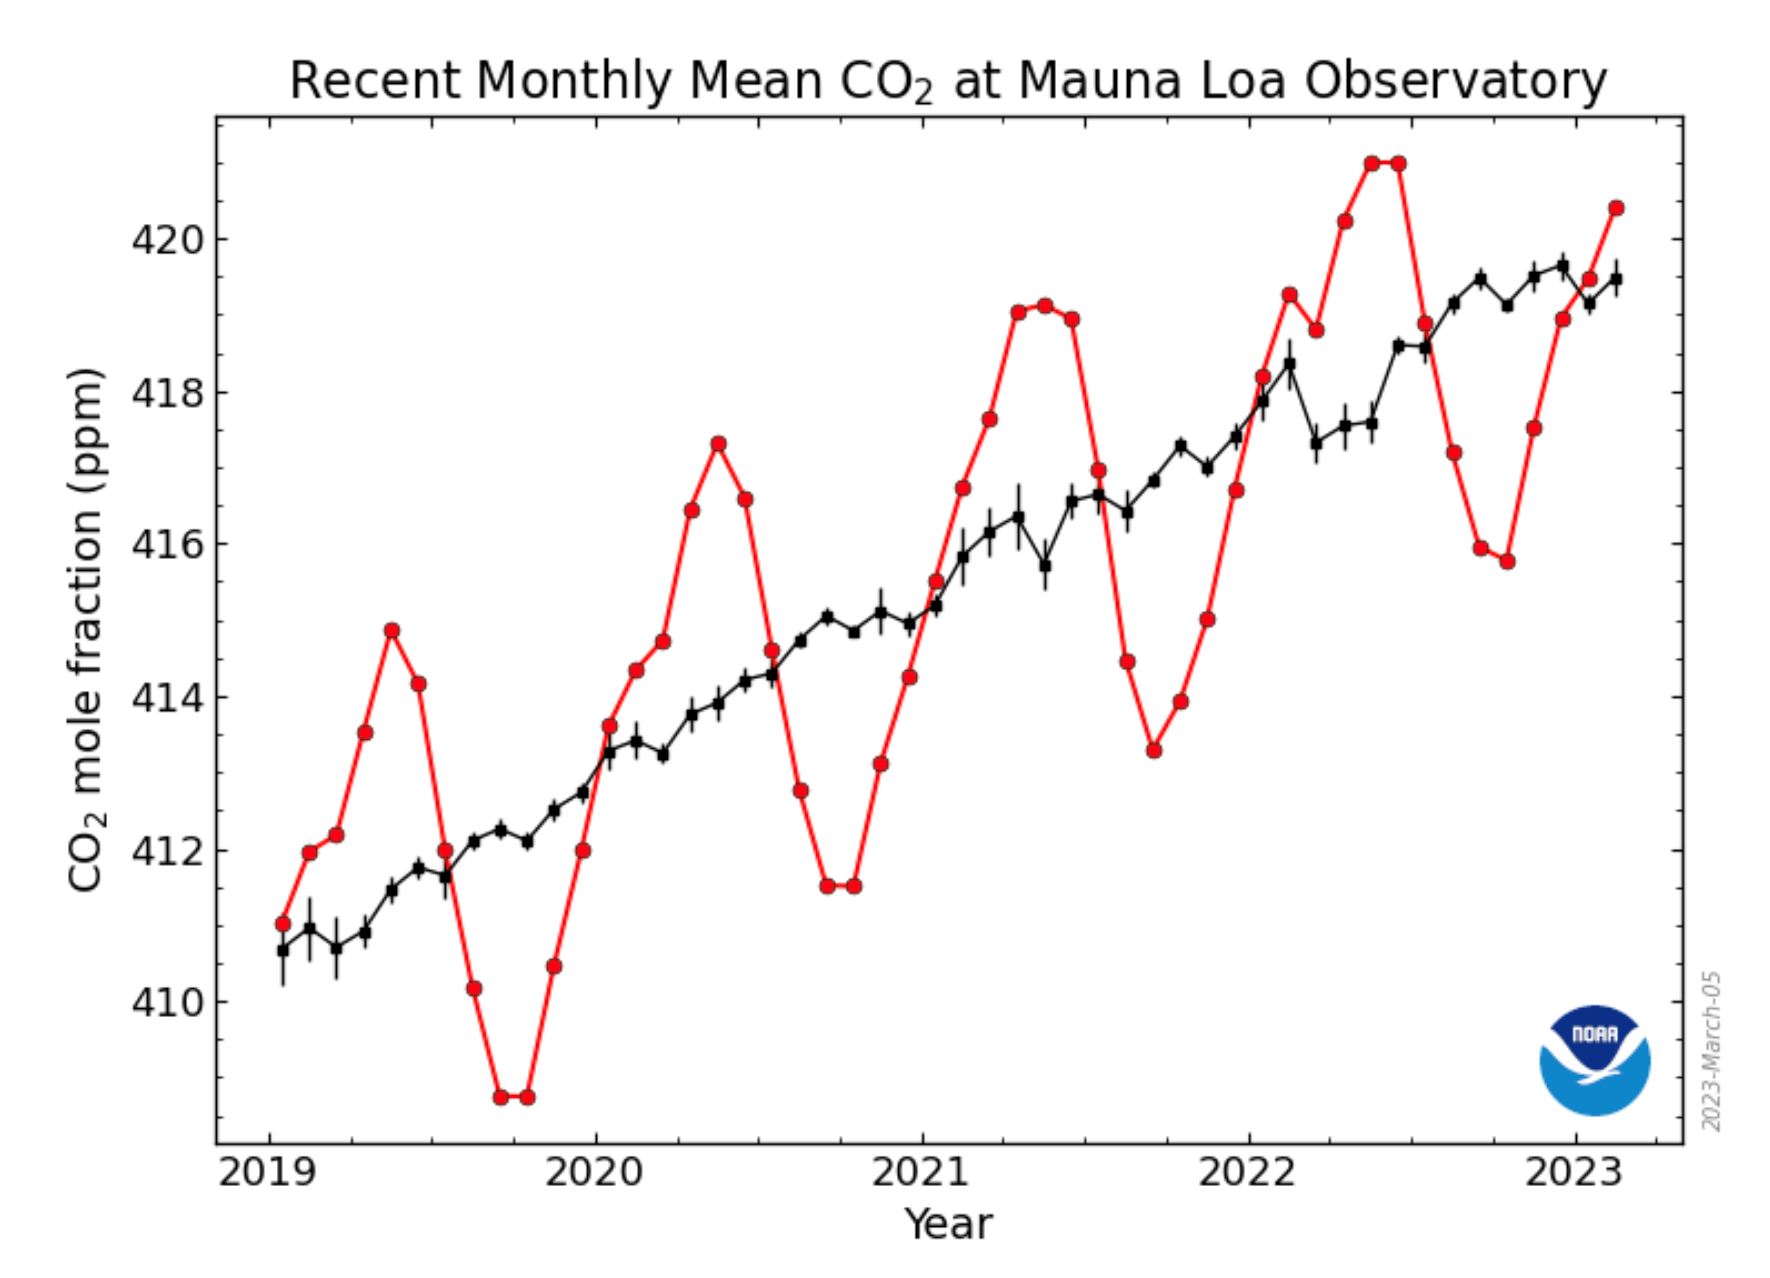  NOAA.gov Global Monitoring Laboratory, 2023 Showing the relentless increase of carbon dioxide in earth’s atmosphere. We simply can’t ignore our scope 3 GHG emissions.